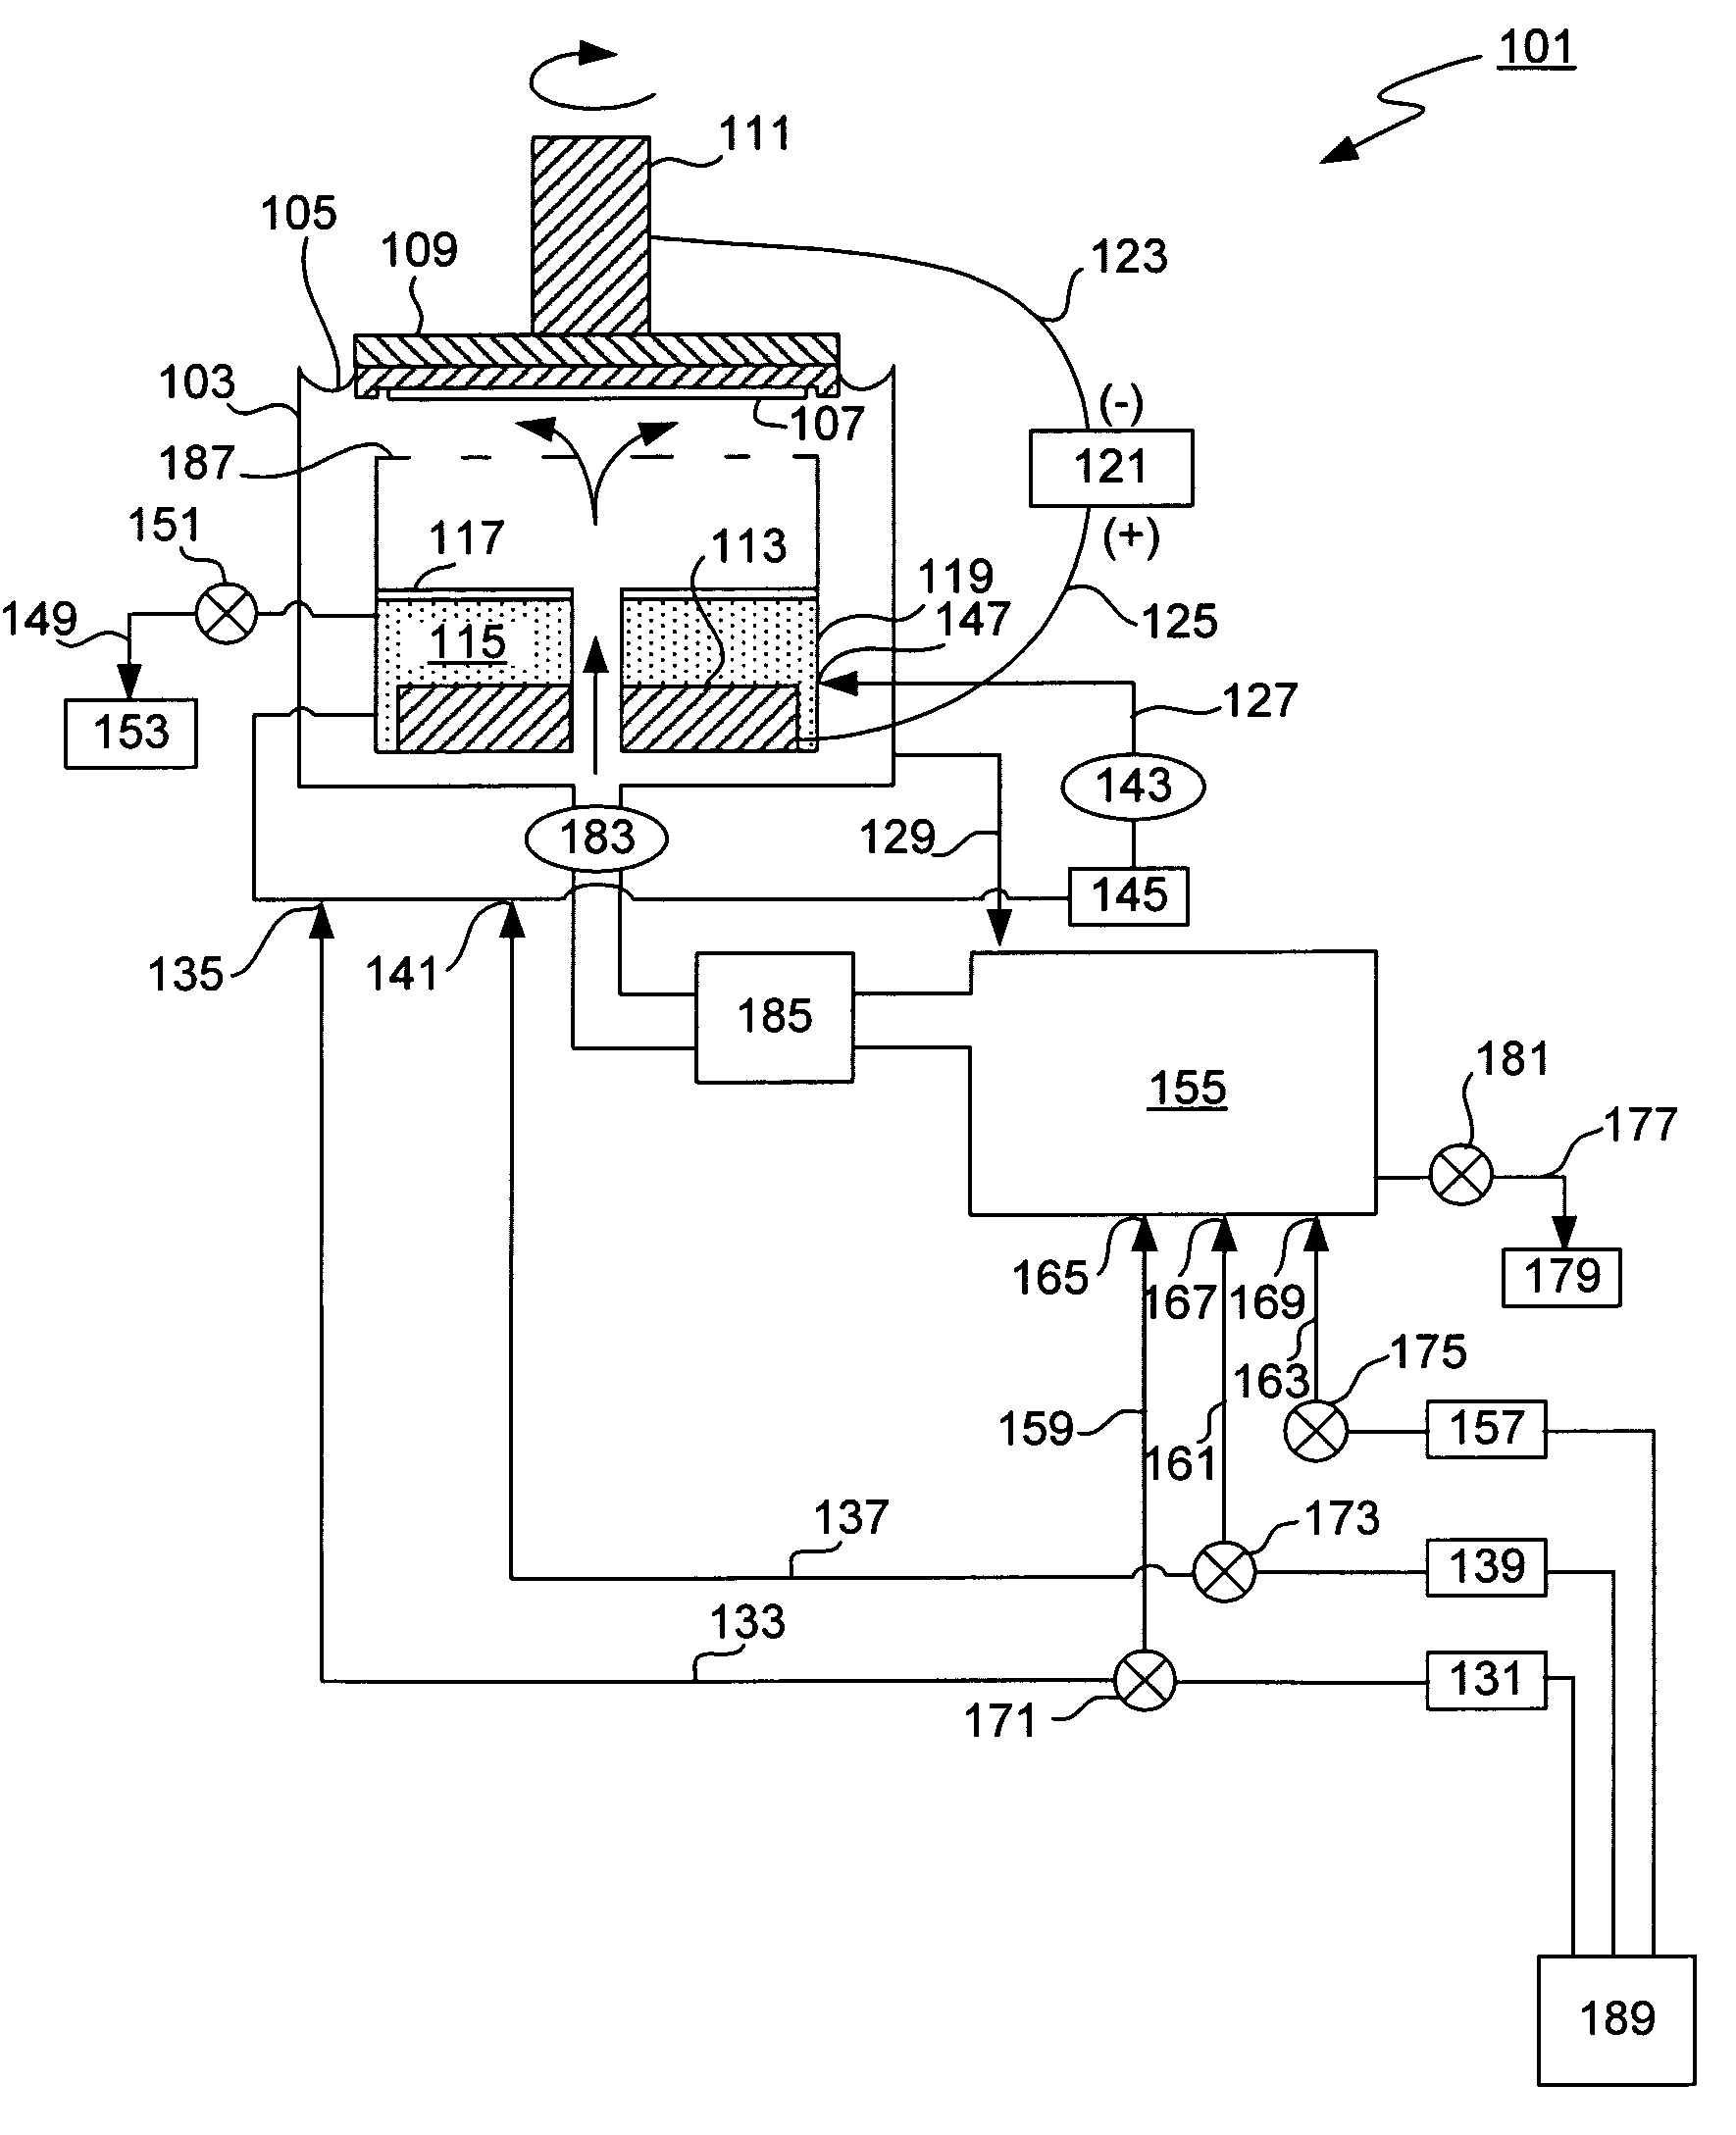 Control of electrolyte composition in a copper electroplating apparatus